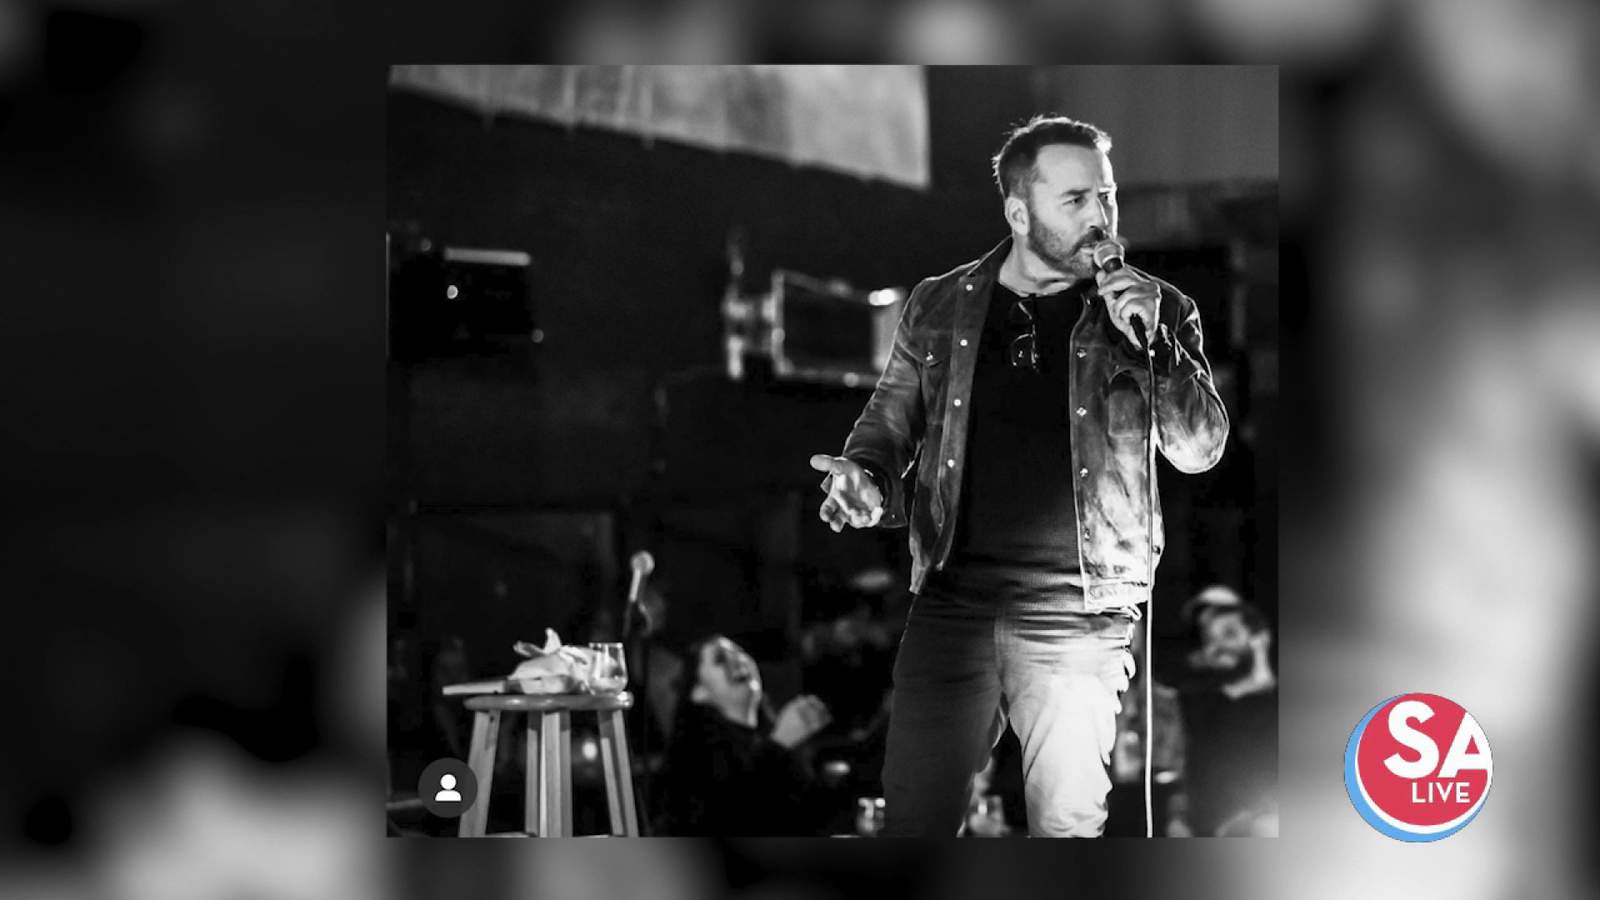 Actor Jeremy Piven in San Antonio for his stand-up comedy show this weekend